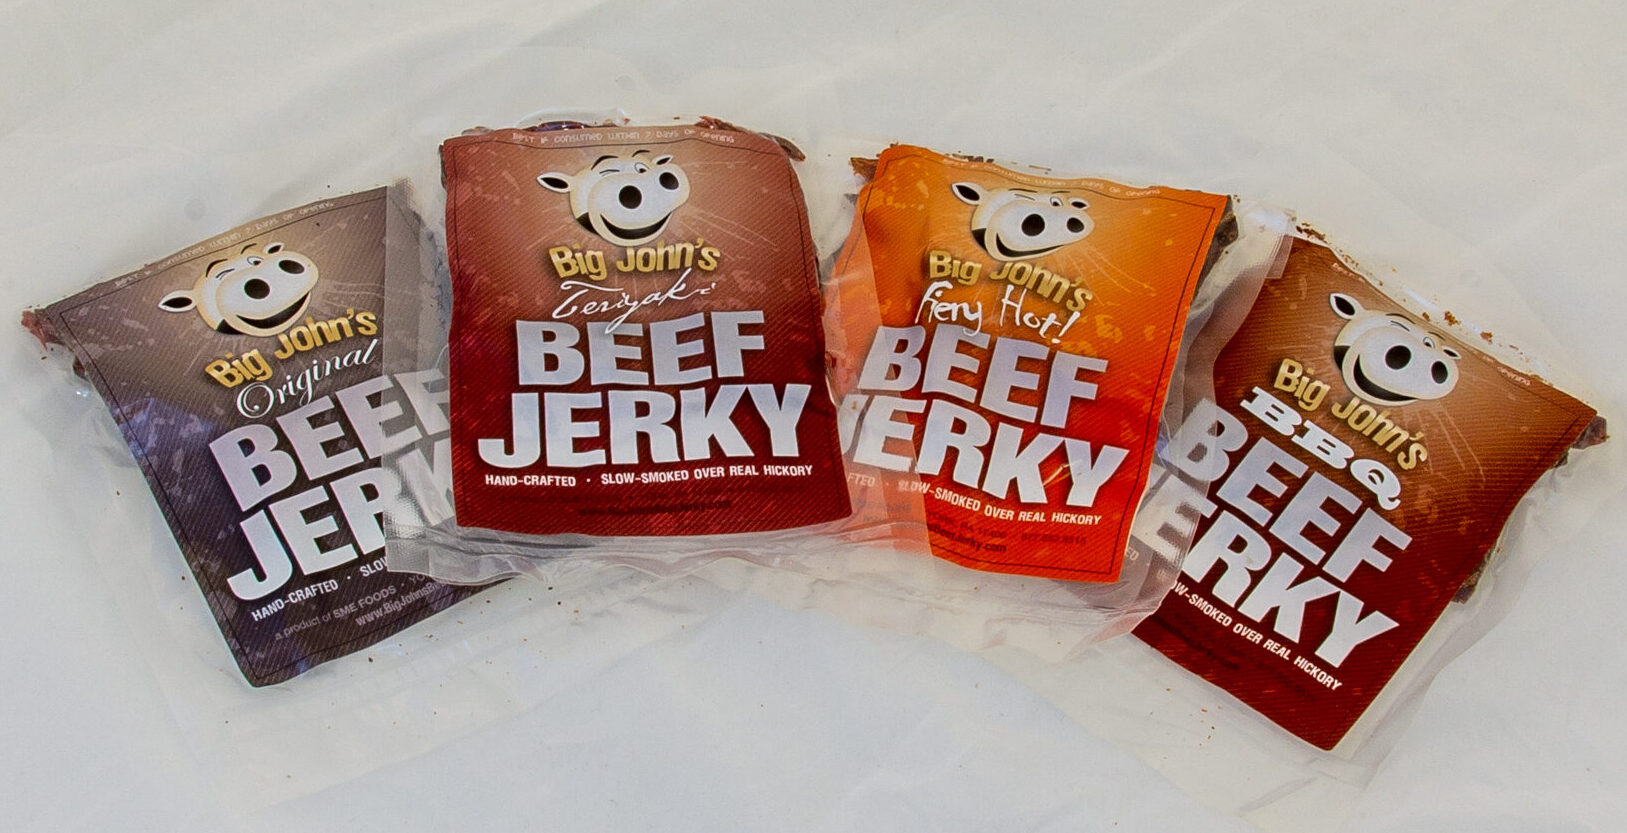 Big John's Beef Jerky, featuring Original, Teriyaki, Fiery Hot and BBQ, all the classic flavors, and hickory smoked with the Big John's classic technique